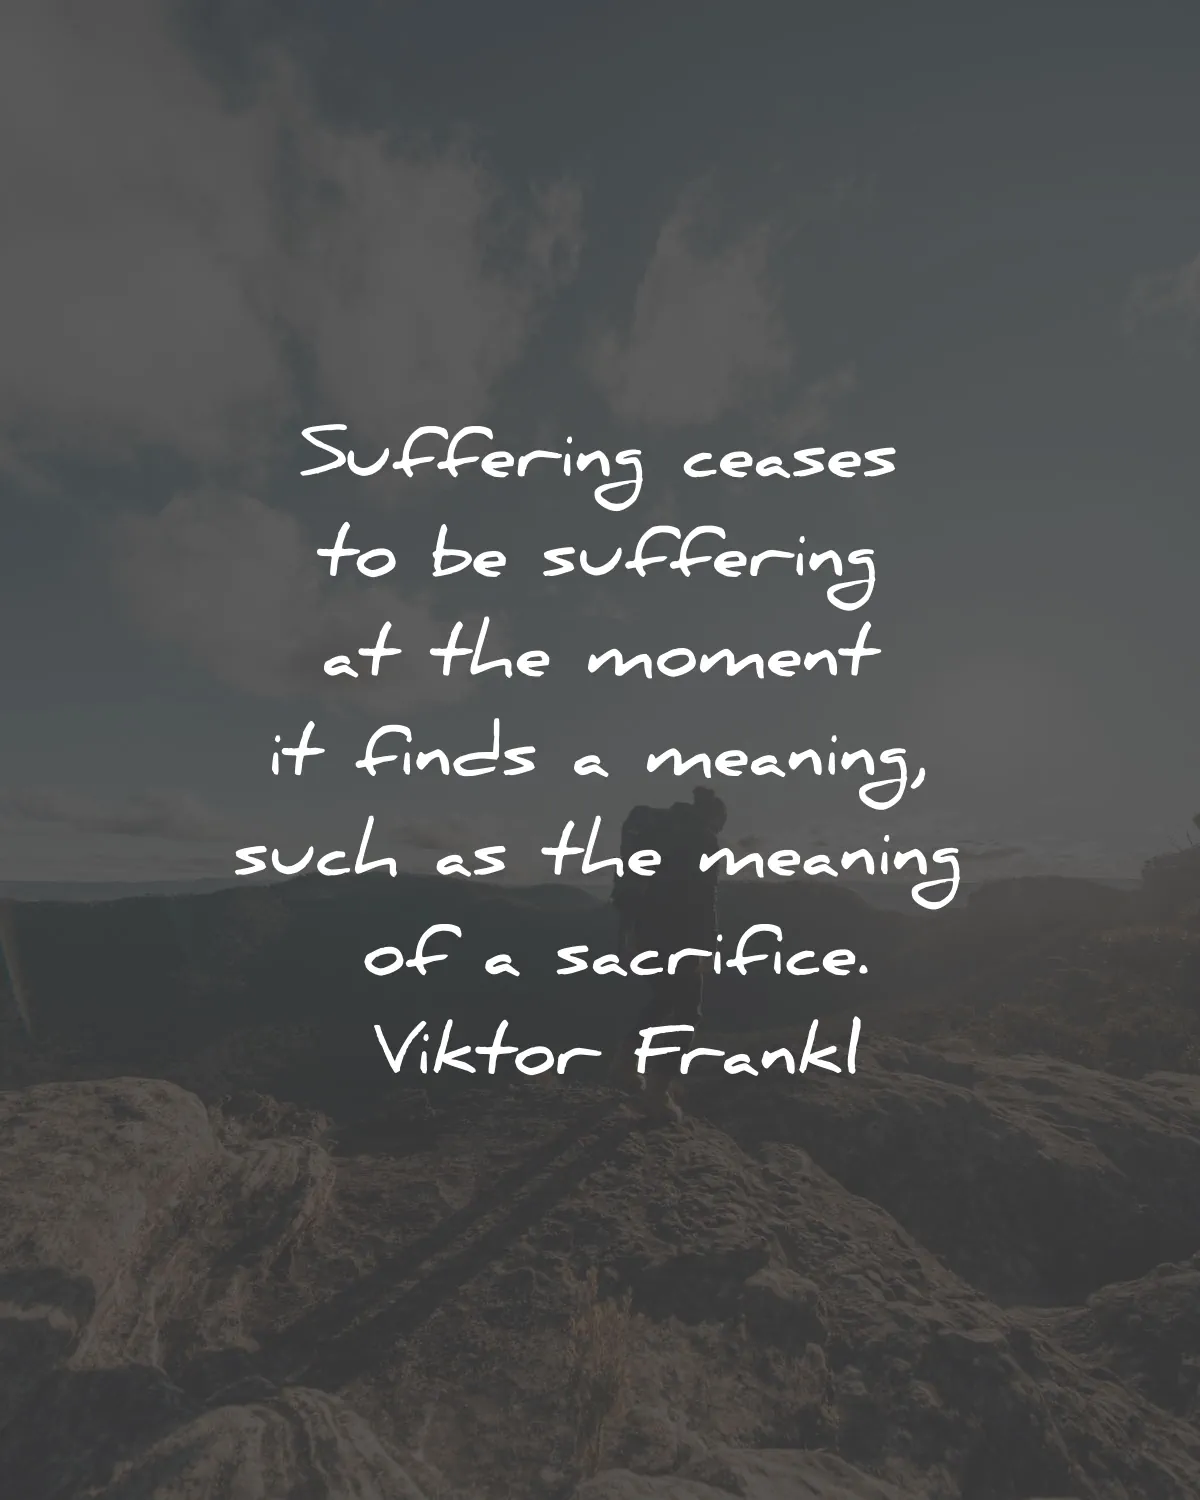 mans search for meaning quotes viktor frankl suffering ceases finds sacrifice wisdom